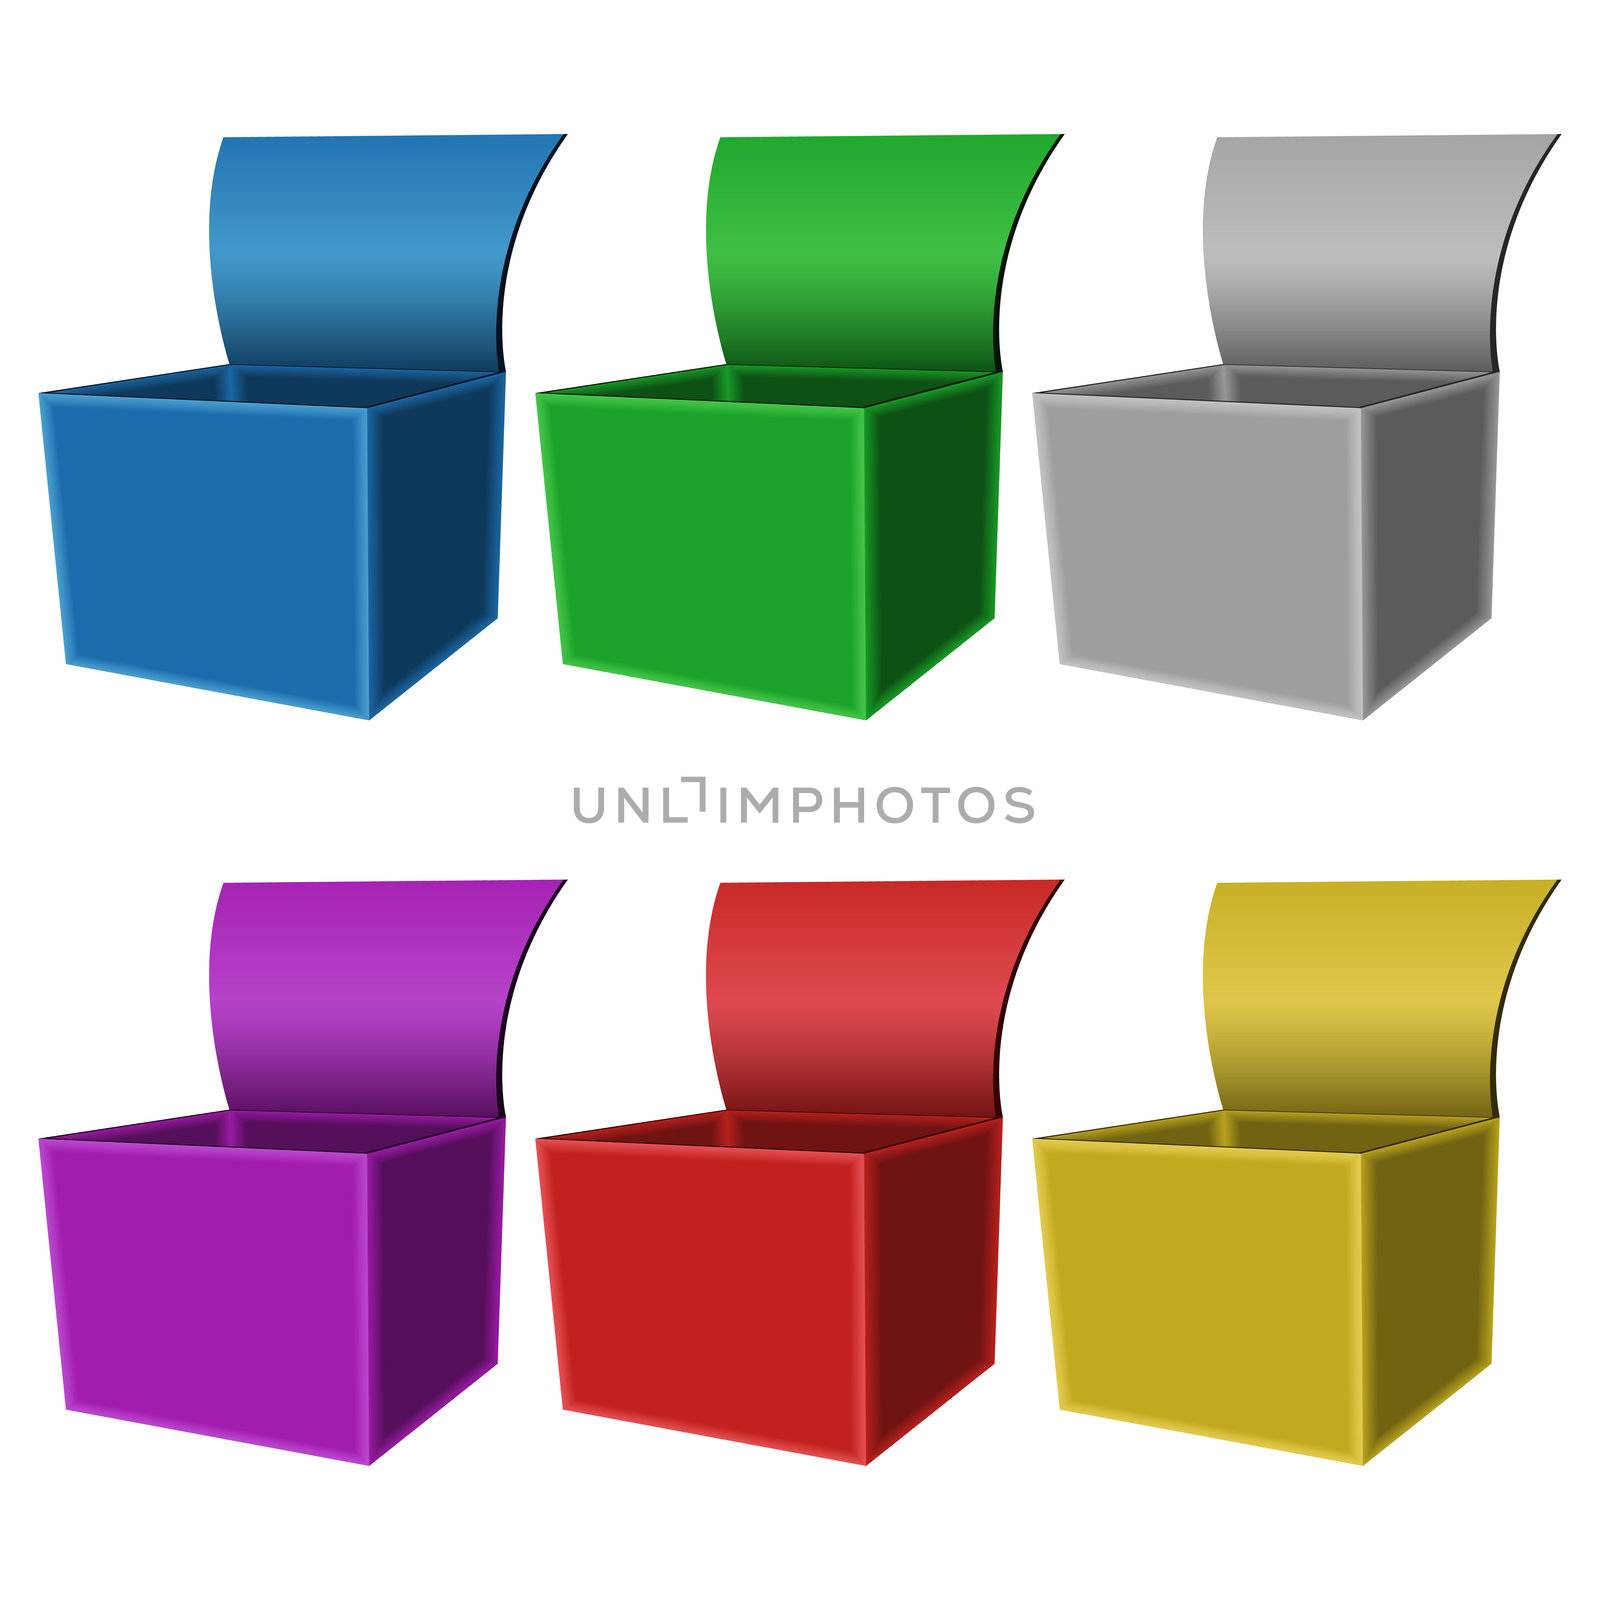 open boxes against white background, abstract vector art illustration